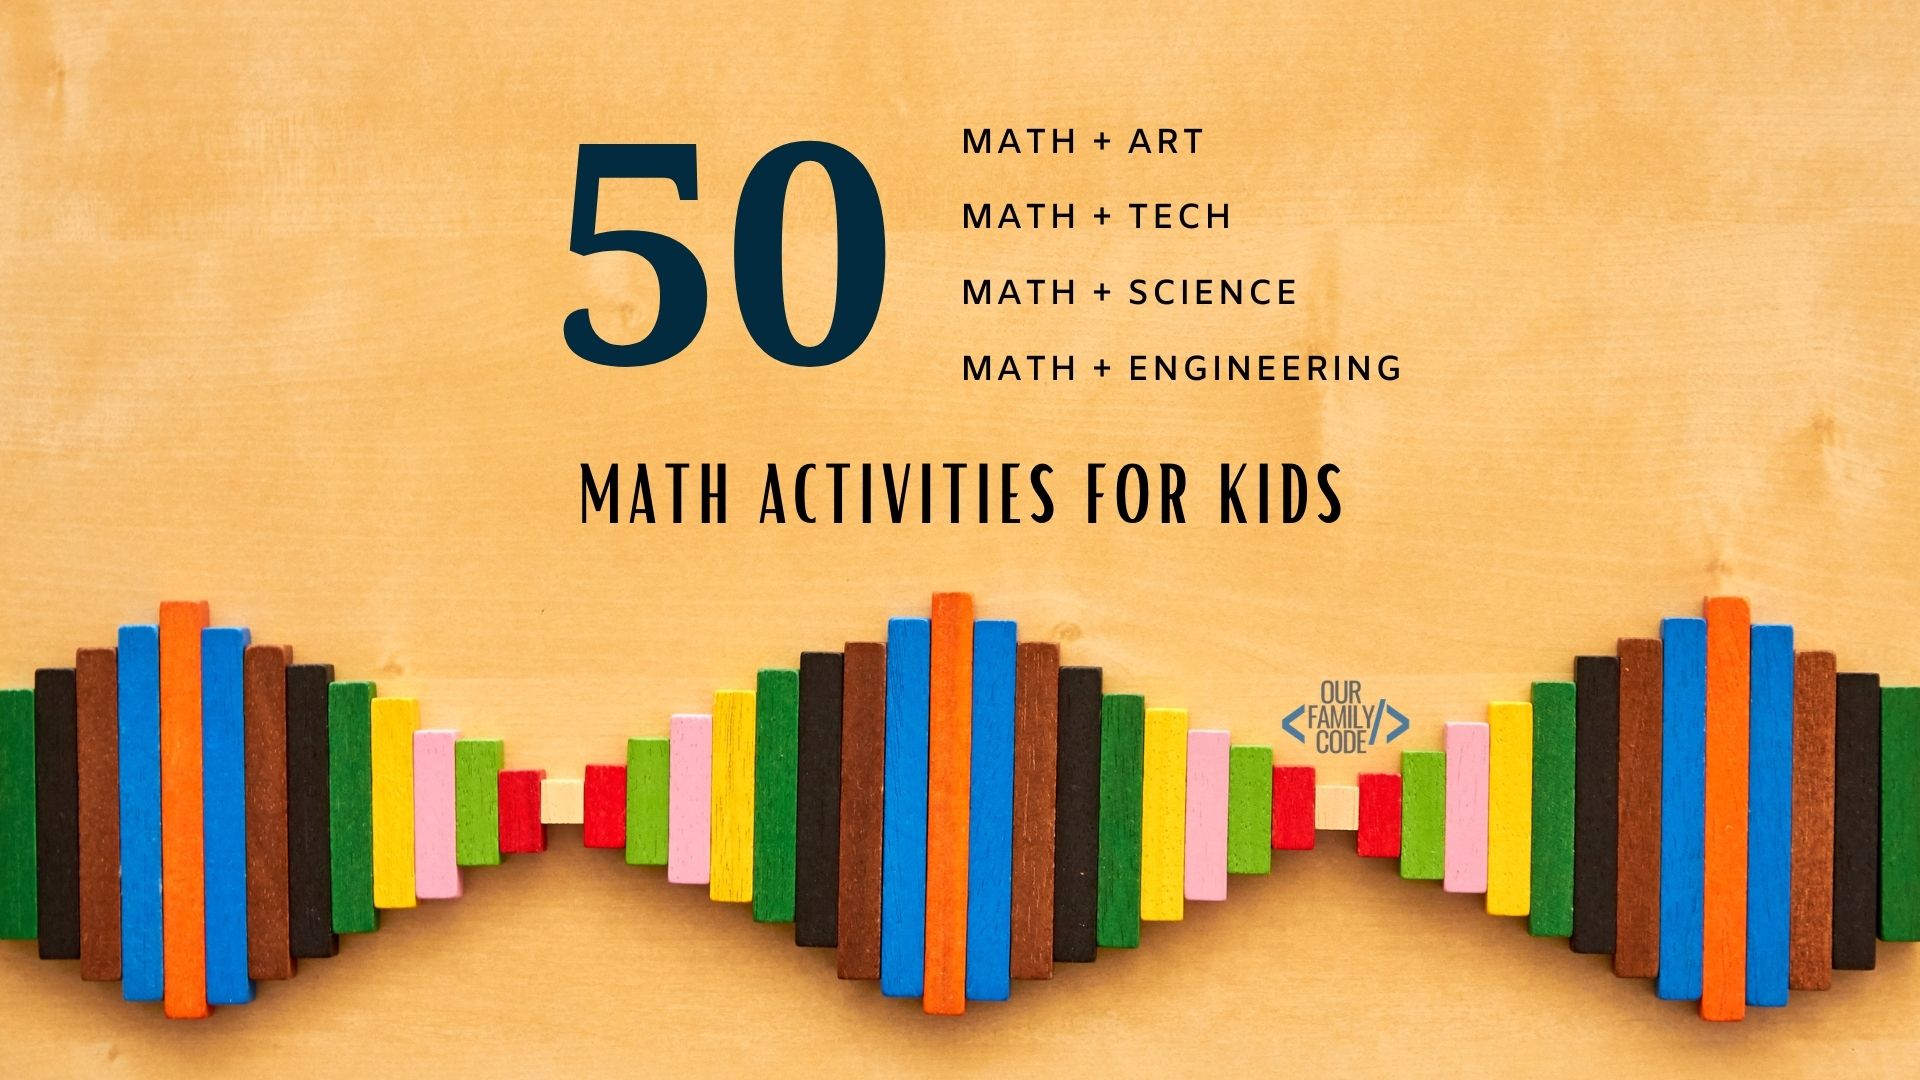 A picture of 50 math activities for kids written on a tan background.